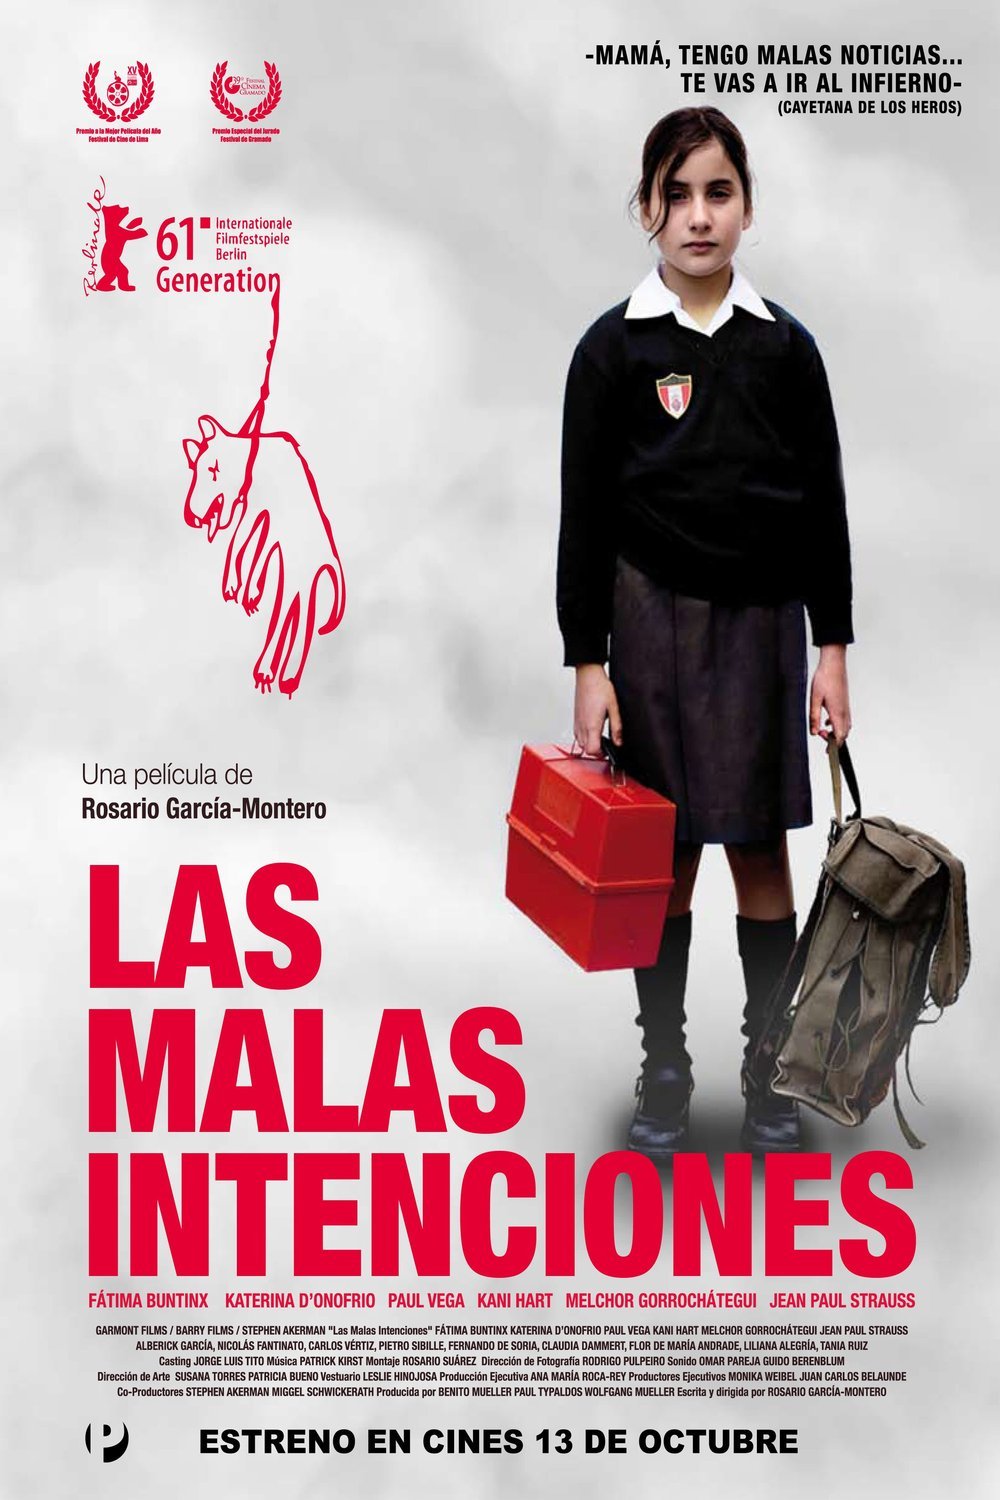 Spanish poster of the movie The Bad Intentions